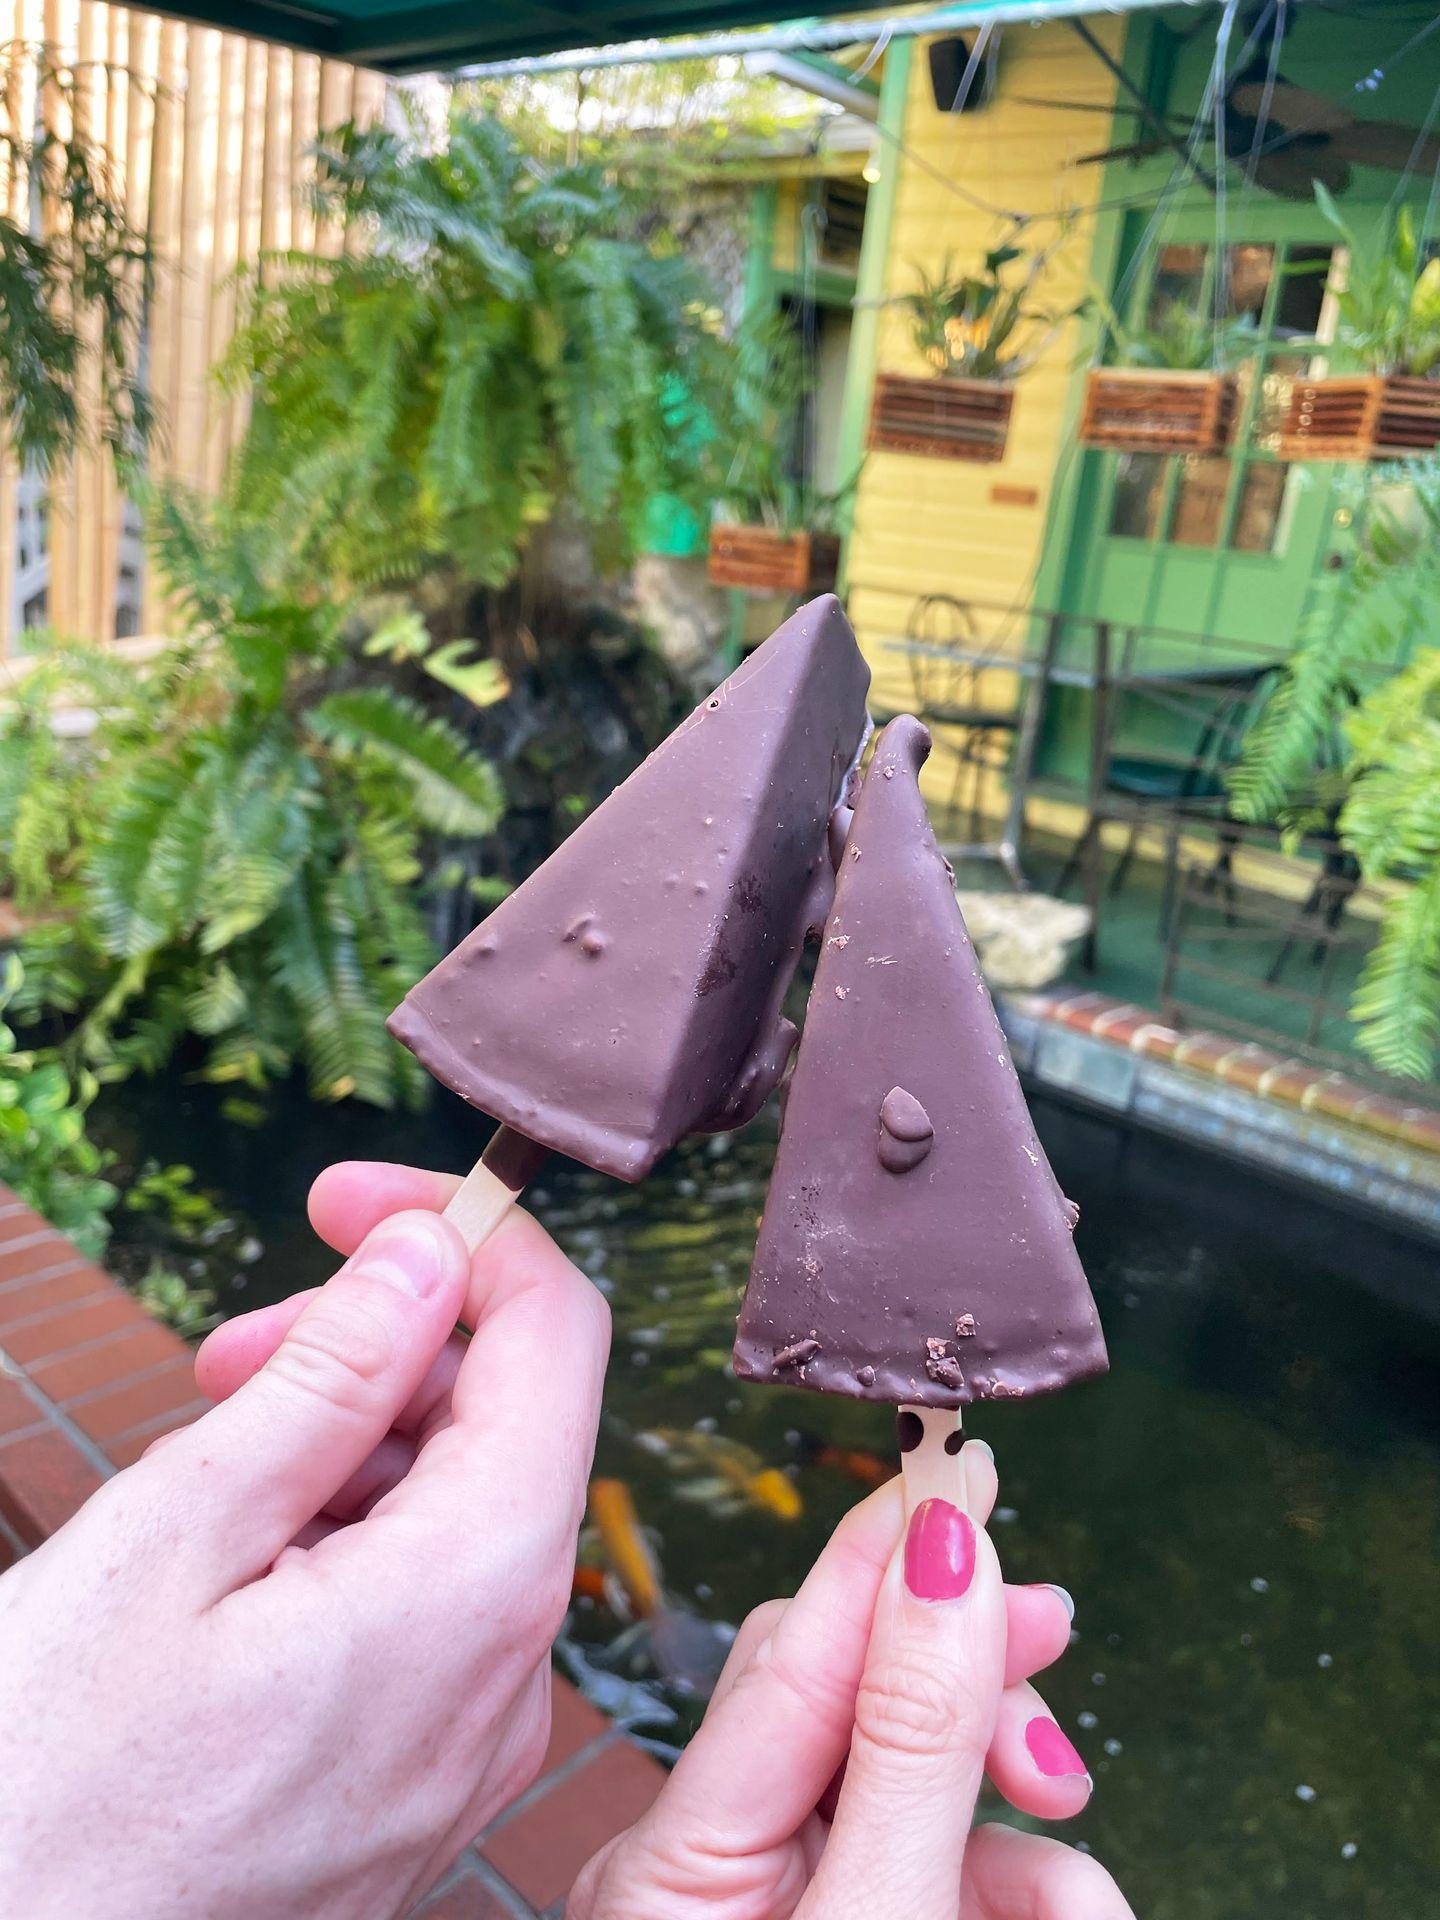 Two chocolate covered key lime pies on a stick being held up